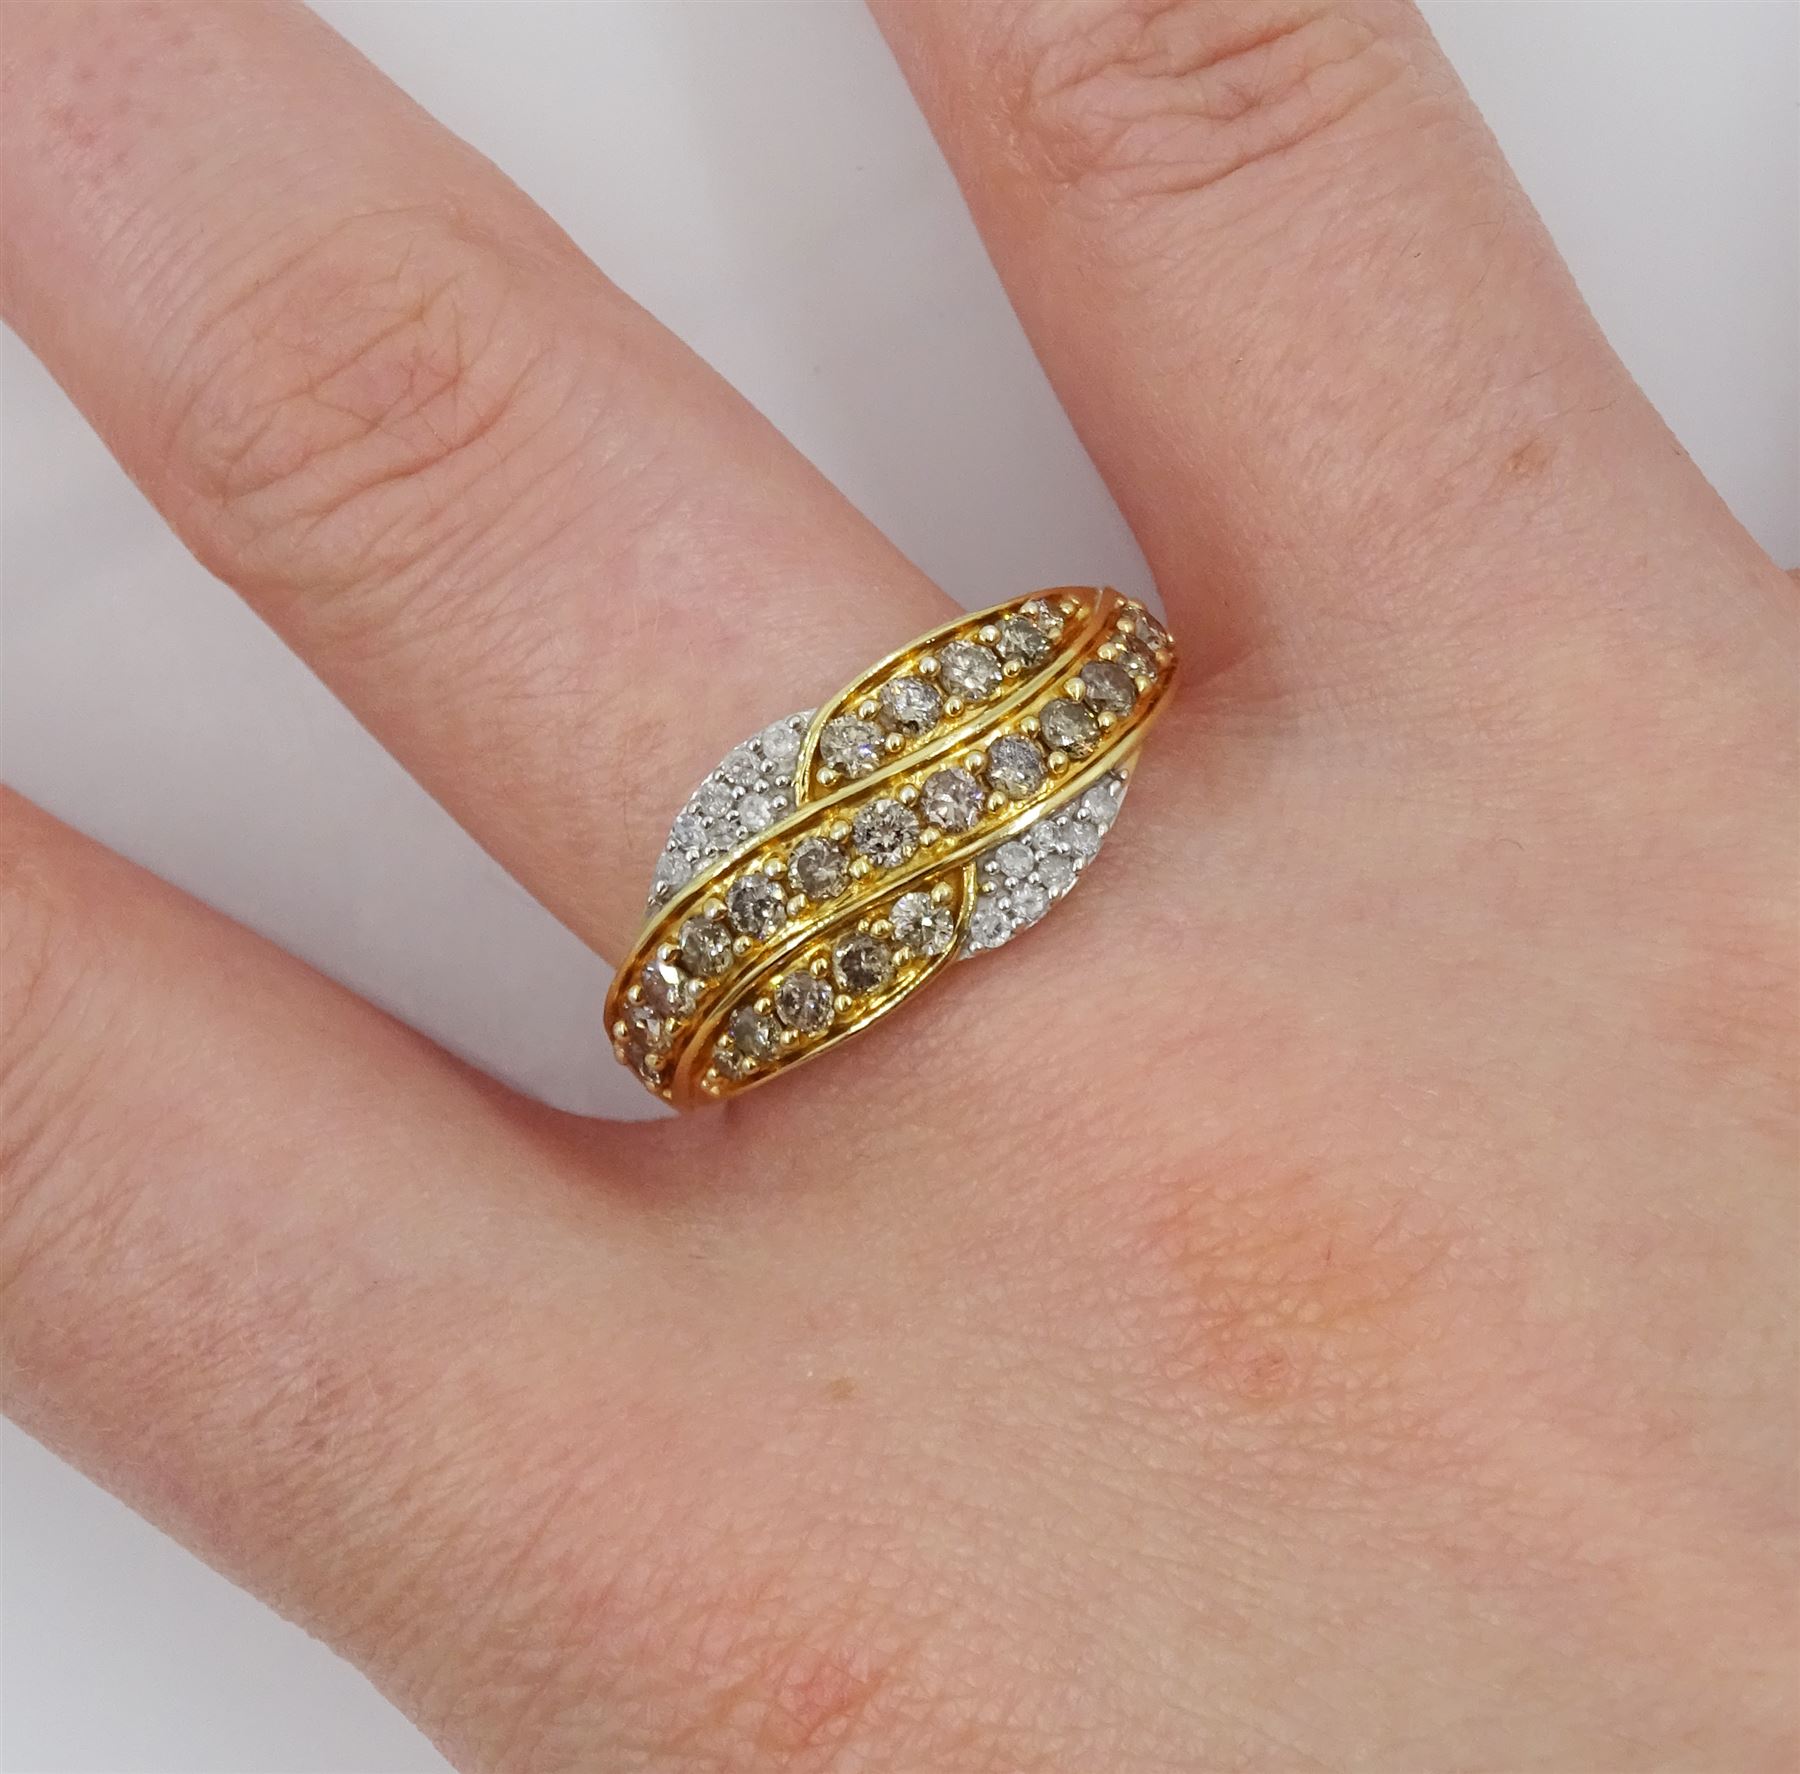 Silver-gilt champagne and white round brilliant cut diamond crossover ring - Image 2 of 4